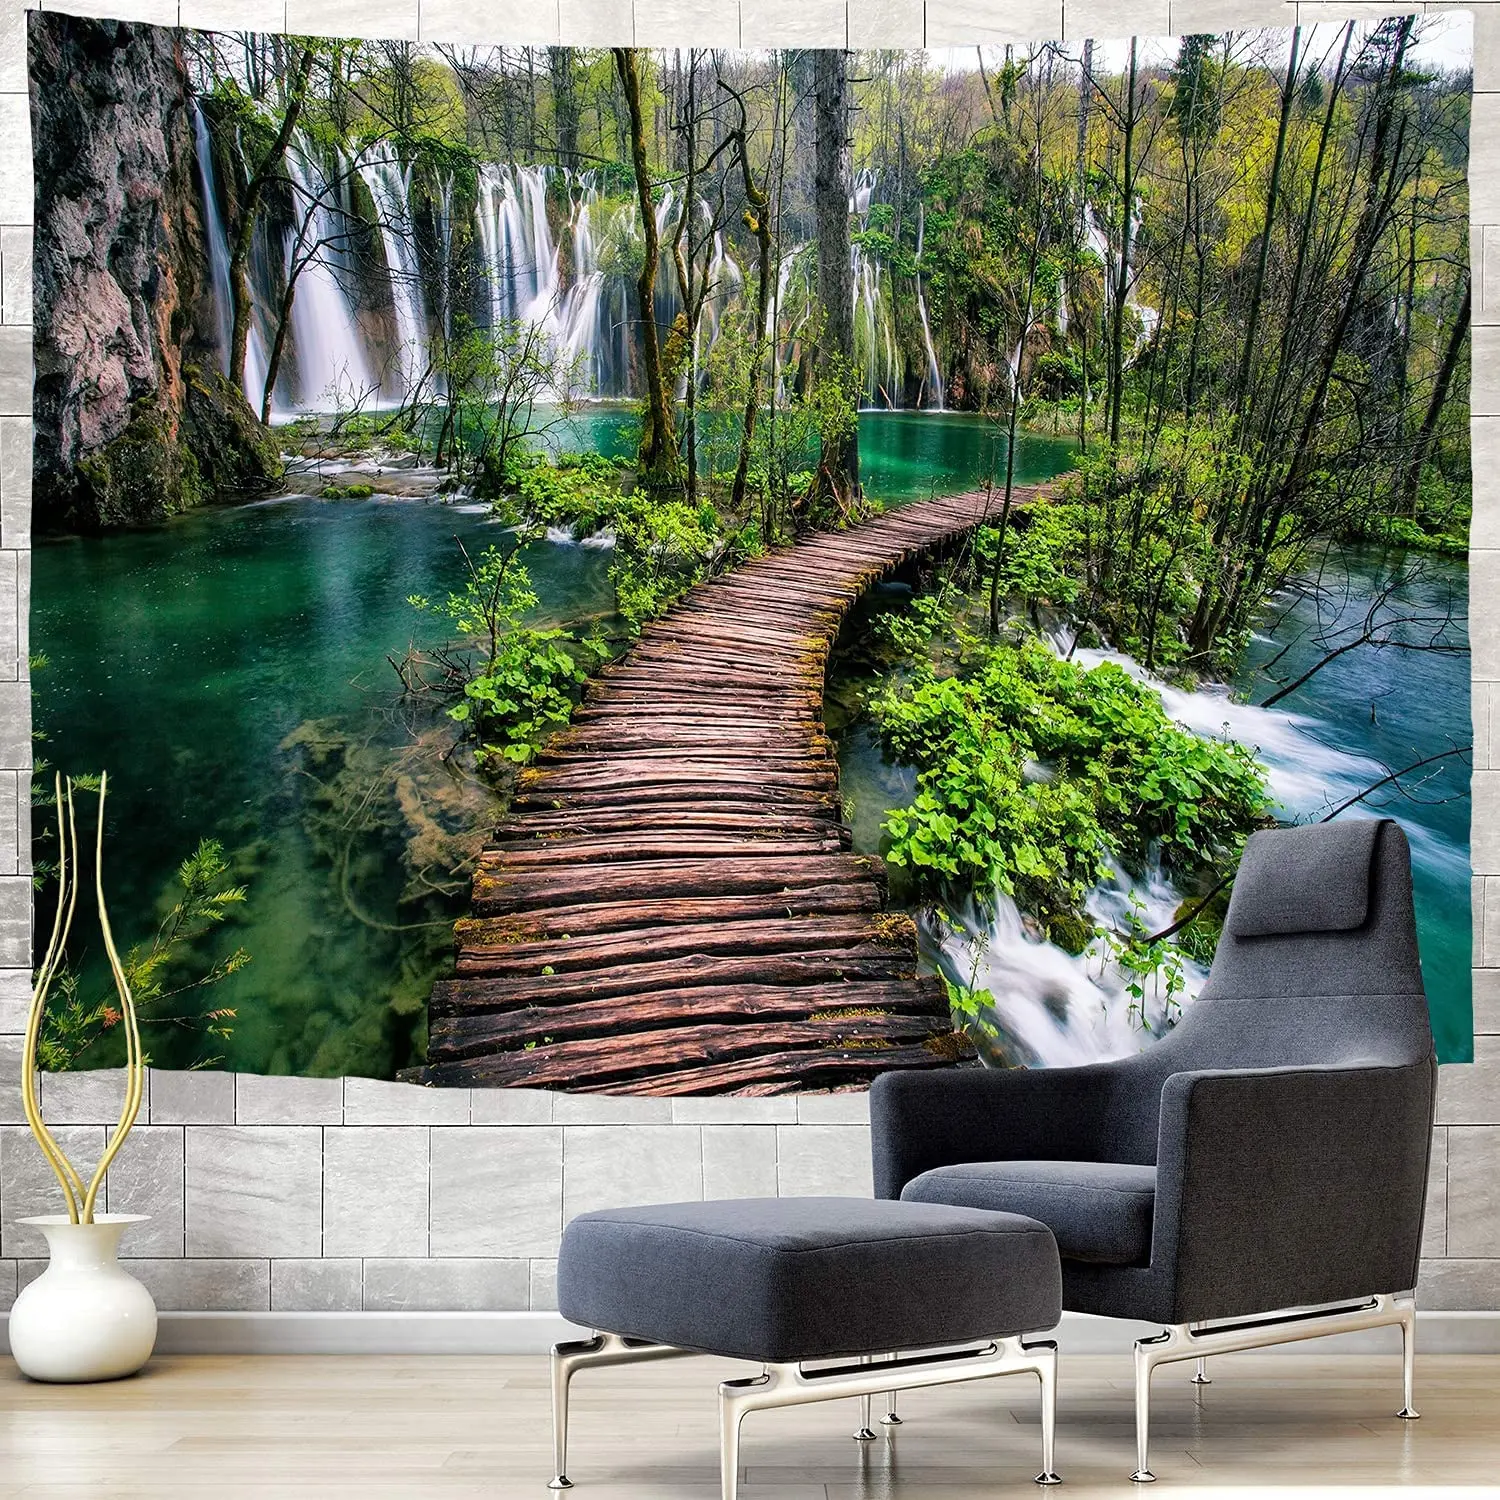 

Green Rainforest Waterfall River Wooden Bridge Wall Hanging Tapestry Living Room Bedroom Dorm For Art Home Decor Wall Tapestries